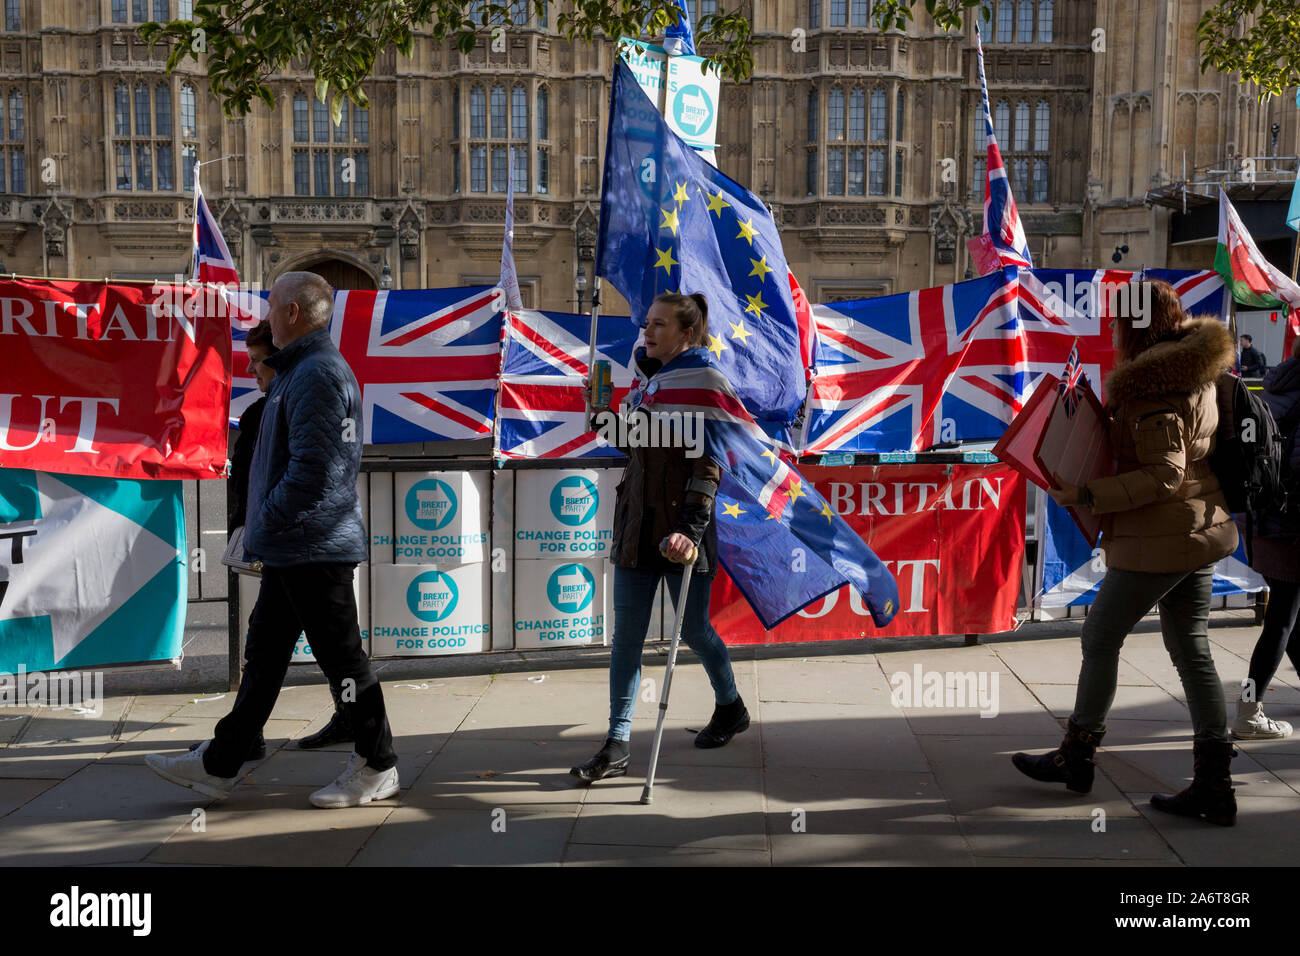 On the day that the EU in Brussels agreed in principle to extend Brexit until 31st January 2020 (aka 'Flextension') and not 31st October 2019, a Remainer lady carries an EU flag past Brexit Party flags and banners during a Brexit protest outside parliament, on 28th October 2019, in Westminster, London, England. Stock Photo